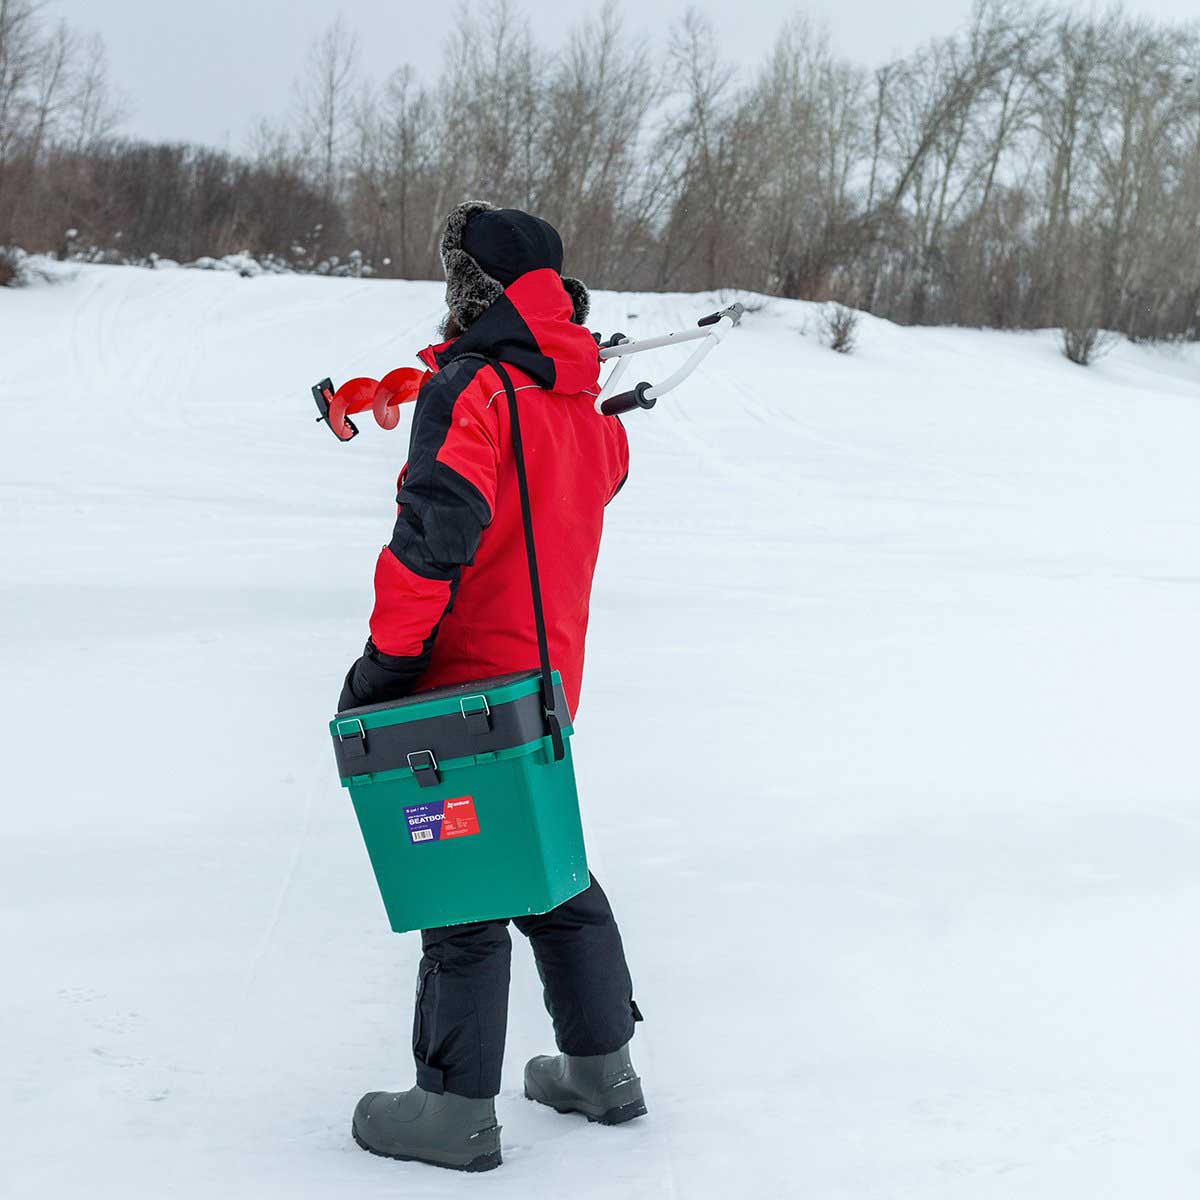 An angler carrying the Ice Fishing Bucket Type Box with Seat and Adjustable Shoulder Strap | 2 compartments | 5 gal | green color